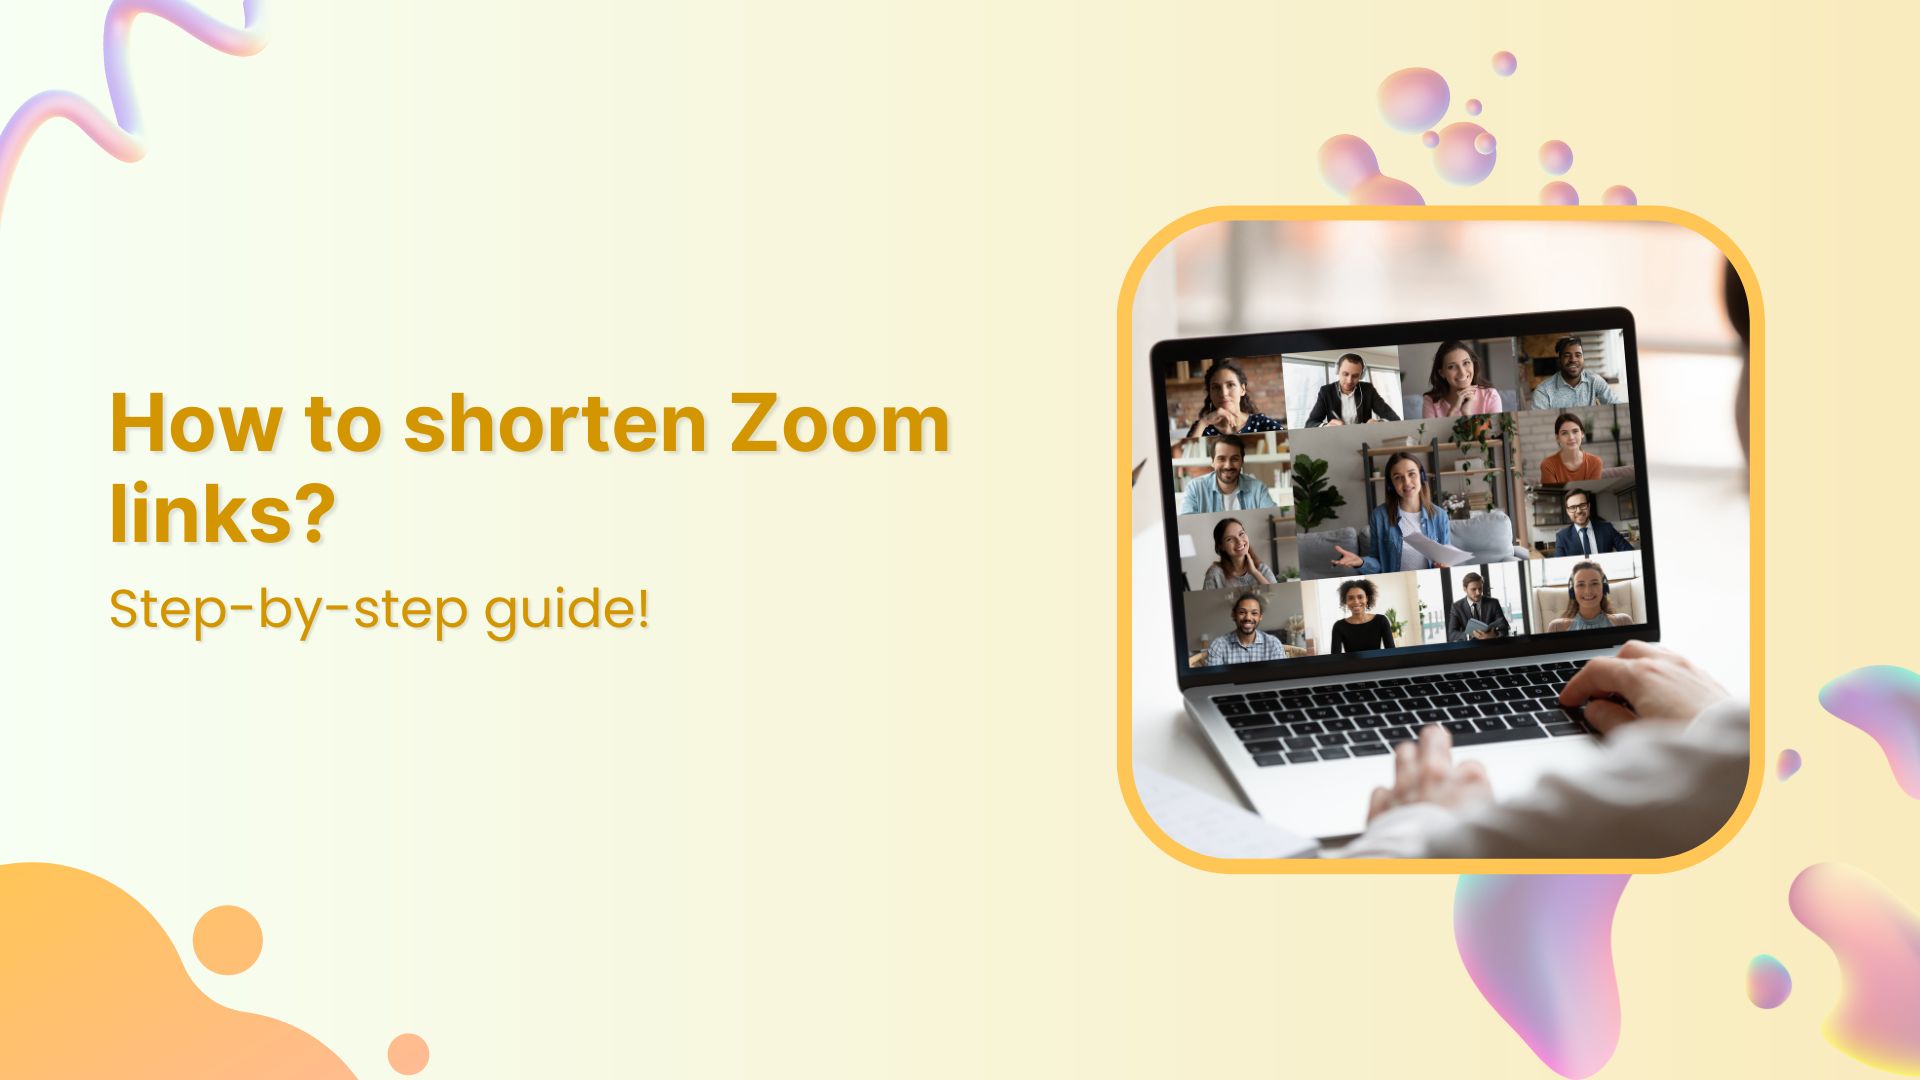 How to shorten Zoom links: Step-by-step guide